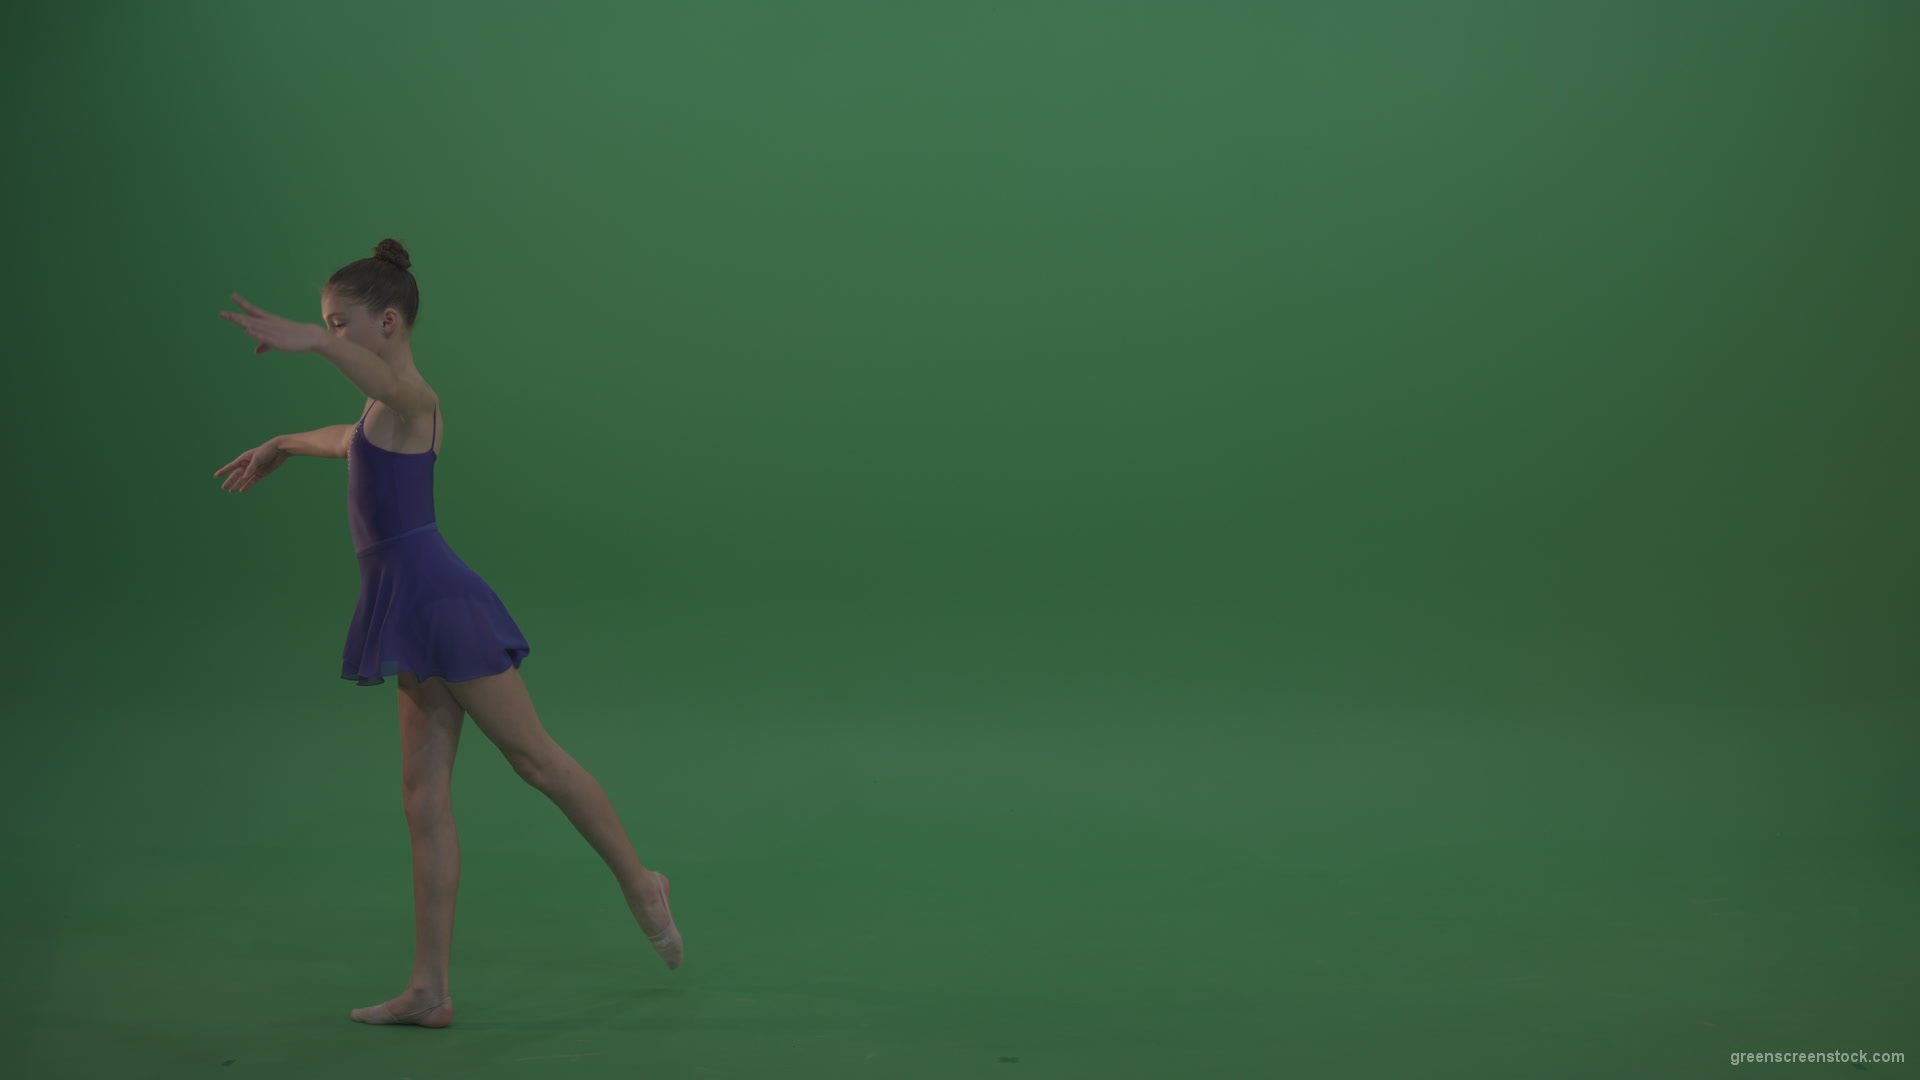 Young_Gymnast_Showing_Marvelous_Technical_Dance_Swan_Ballet_Moves_Technical_Performance_Of_Rhythmic_Artistic_Gymnastics_On_Green_Screen_Wall_Background_004 Green Screen Stock